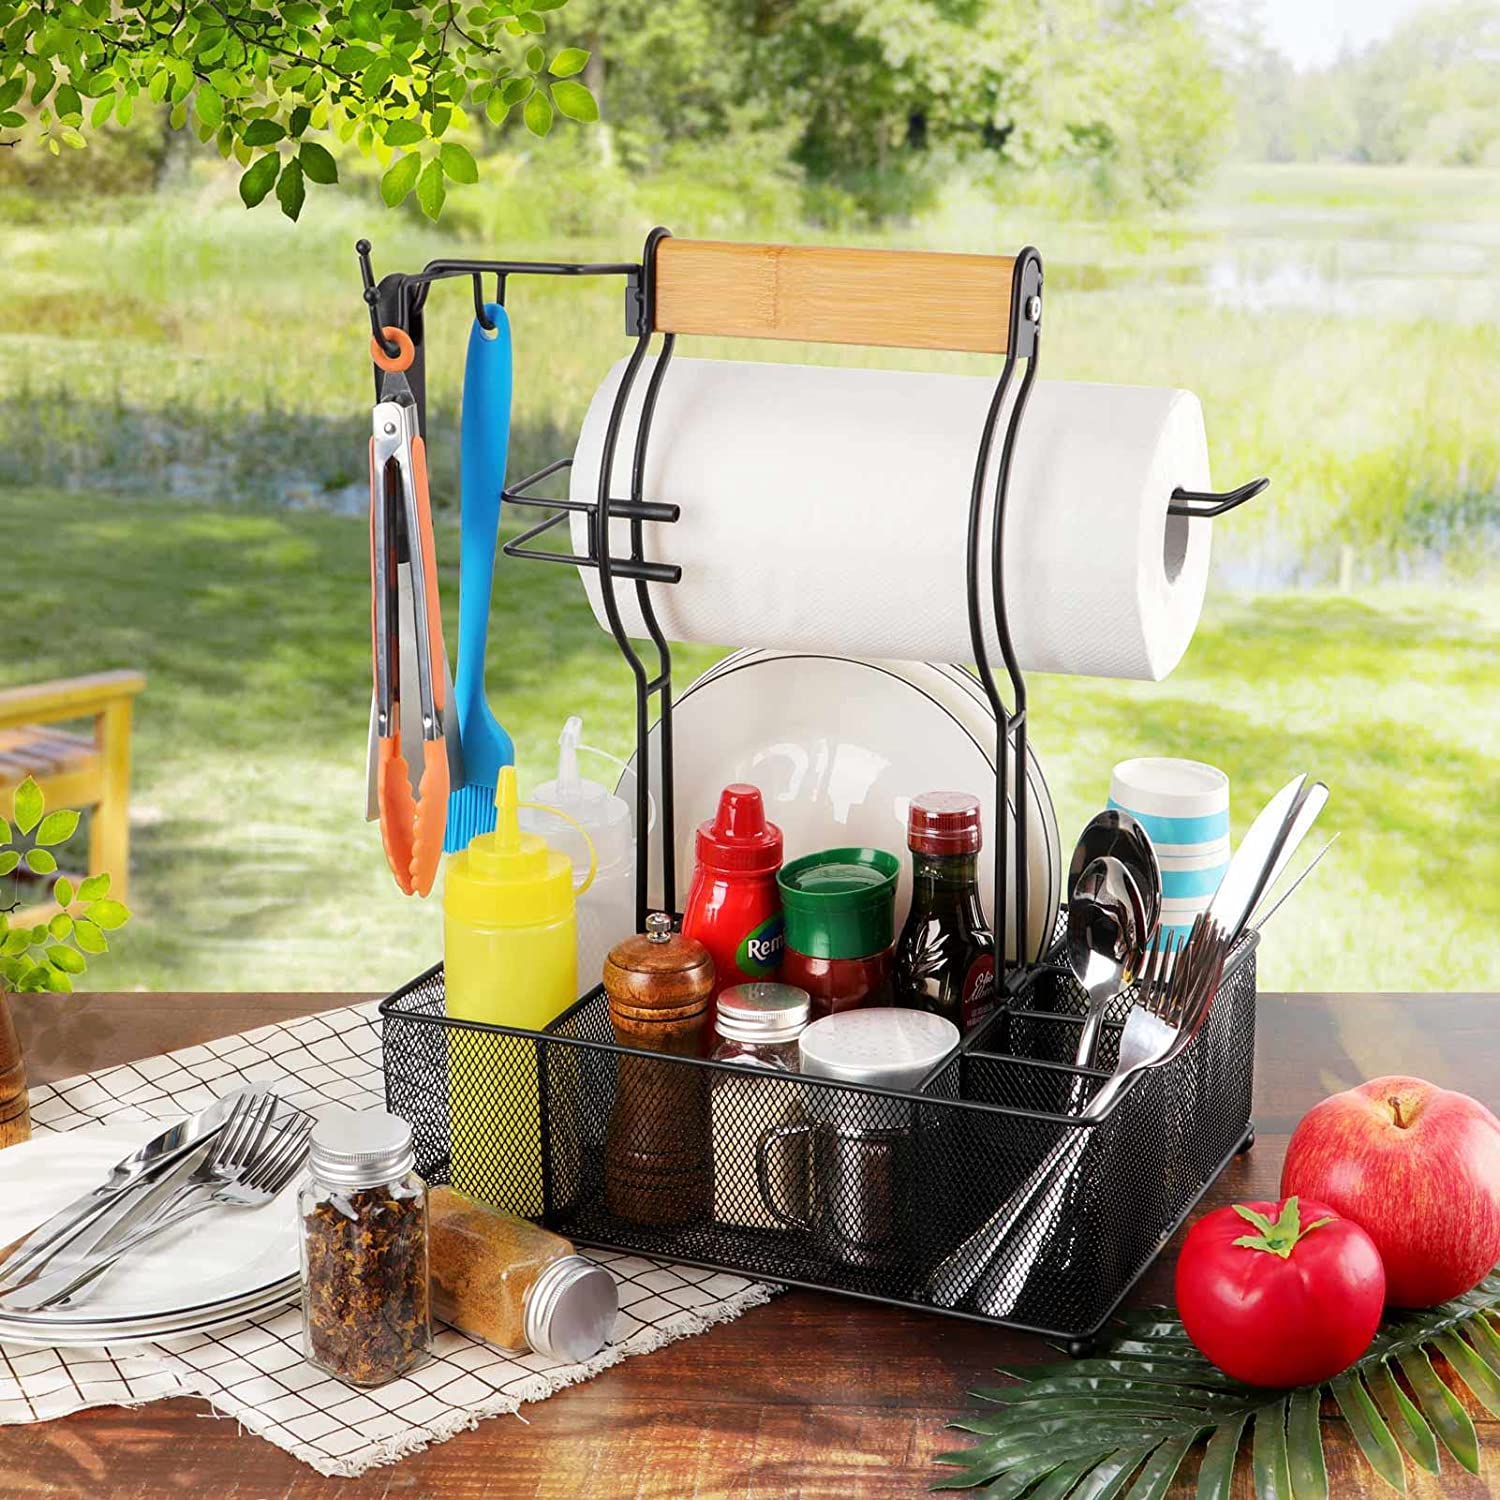 Large Picnic Utensil Condiment Caddy Organizer with 3 Hanging Hooks and Paper Towel Holder for Camping